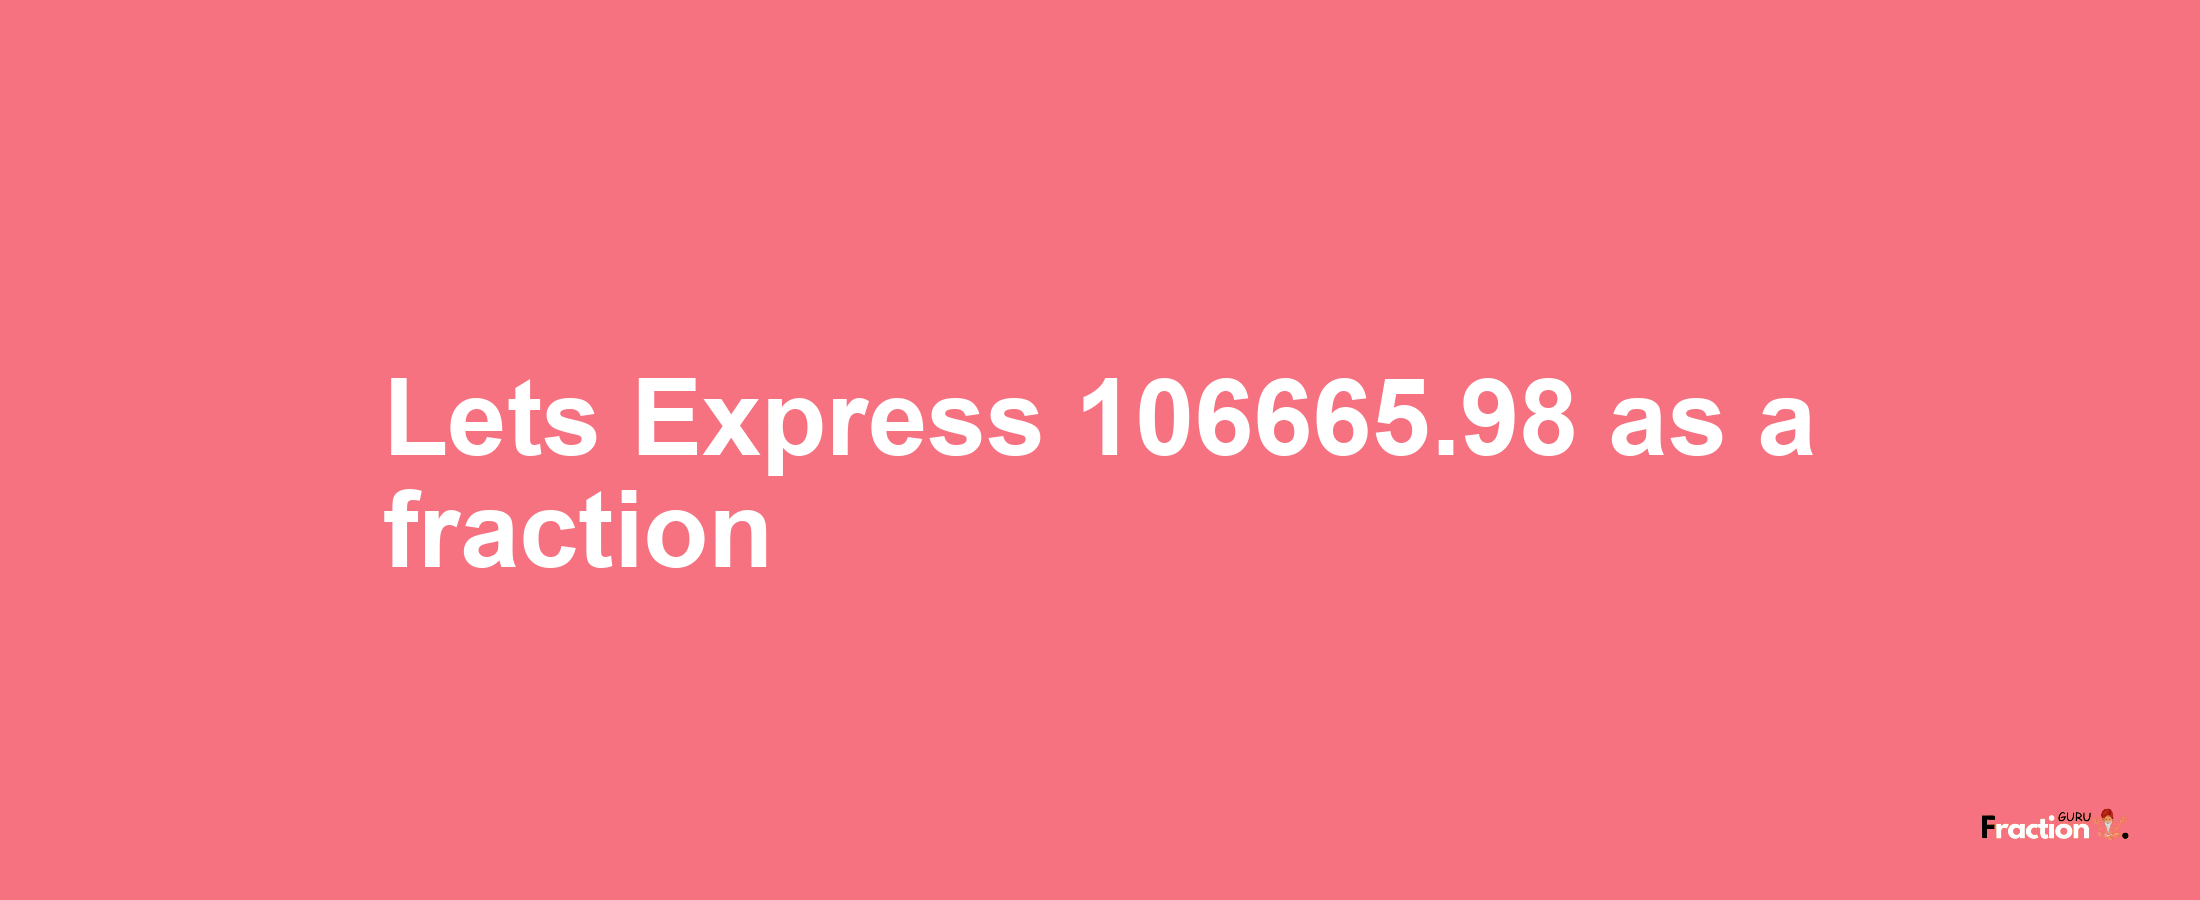 Lets Express 106665.98 as afraction